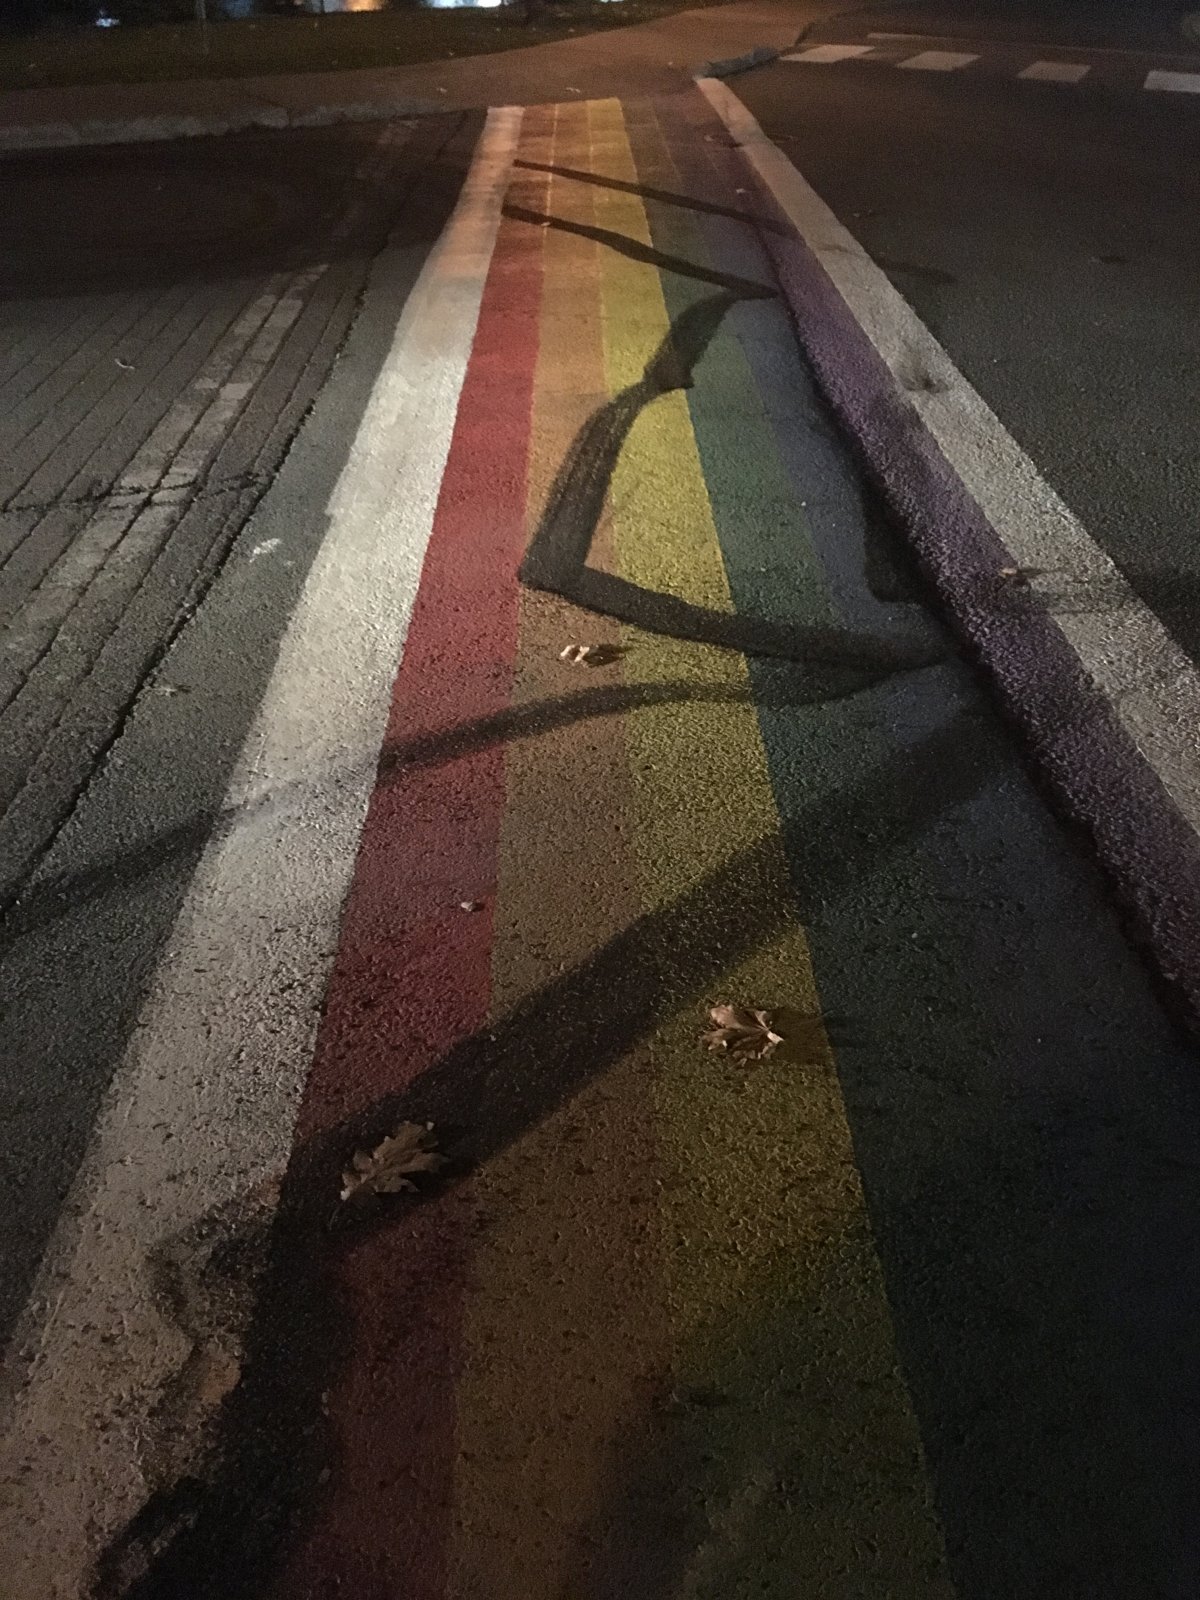 New Glasgow Police continue to investigate after this Pride crosswalk was damaged in an incident early Nov. 11, 2016. A man faces impaired driving charges after leading police on a chase through downtown New Glasgow on his ATV. Police say the damage to the crosswalk is intentional and also charged the man with mischief.